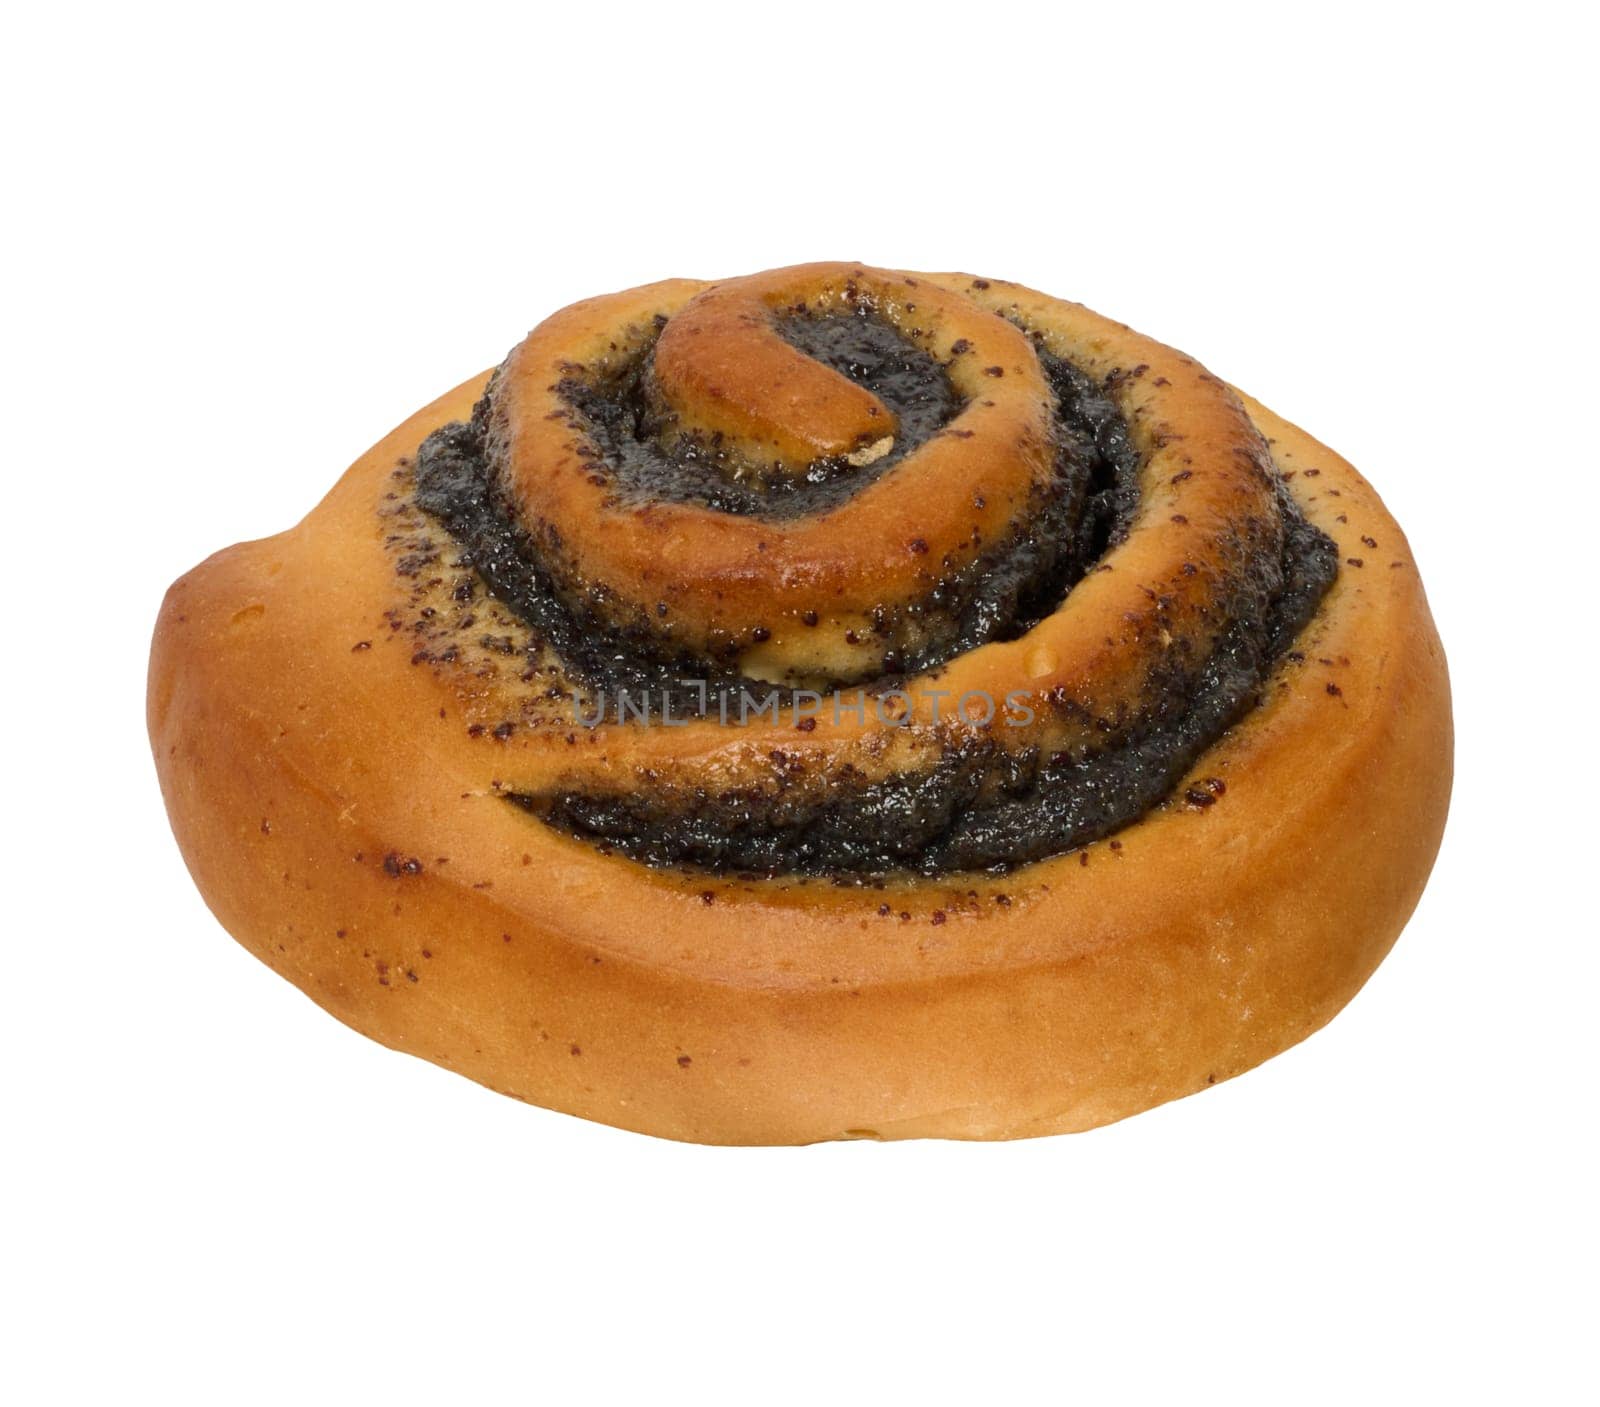 Round baked bun with poppy seeds on isolated background